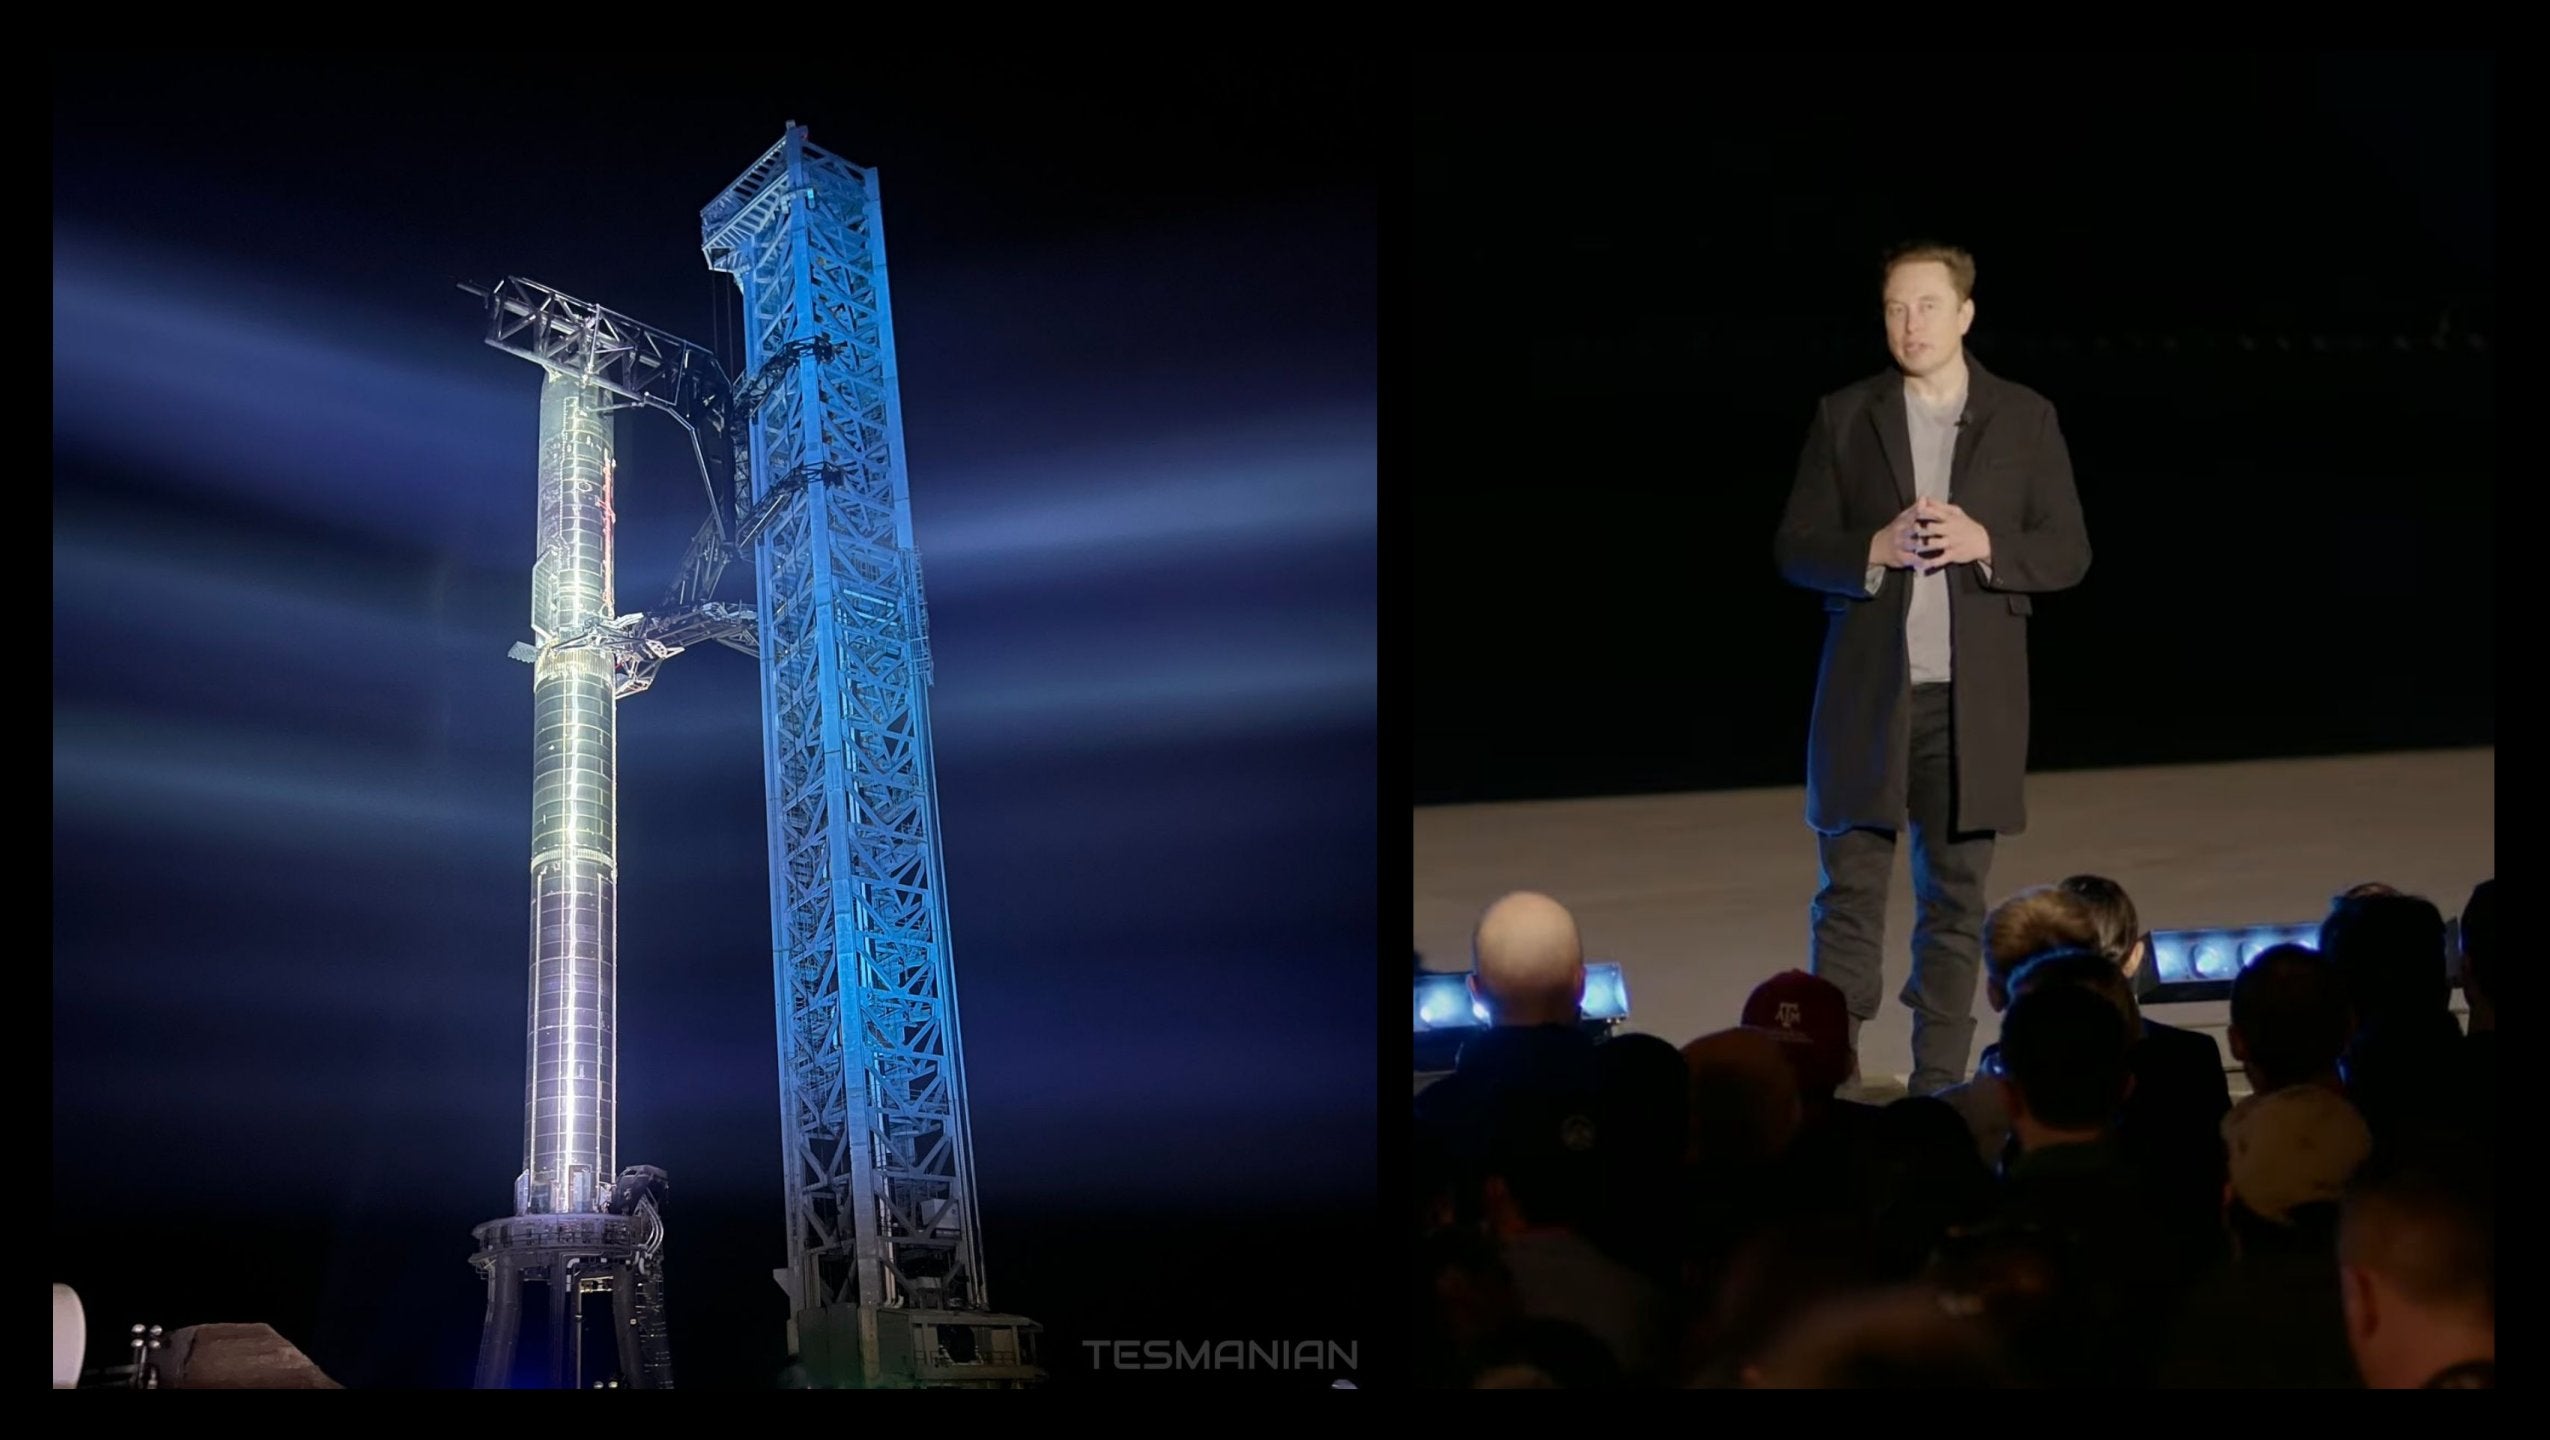 SpaceX Chief Engineer Elon Musk Highlights The Importance Of The Starship Launch System During 2022 Presentation